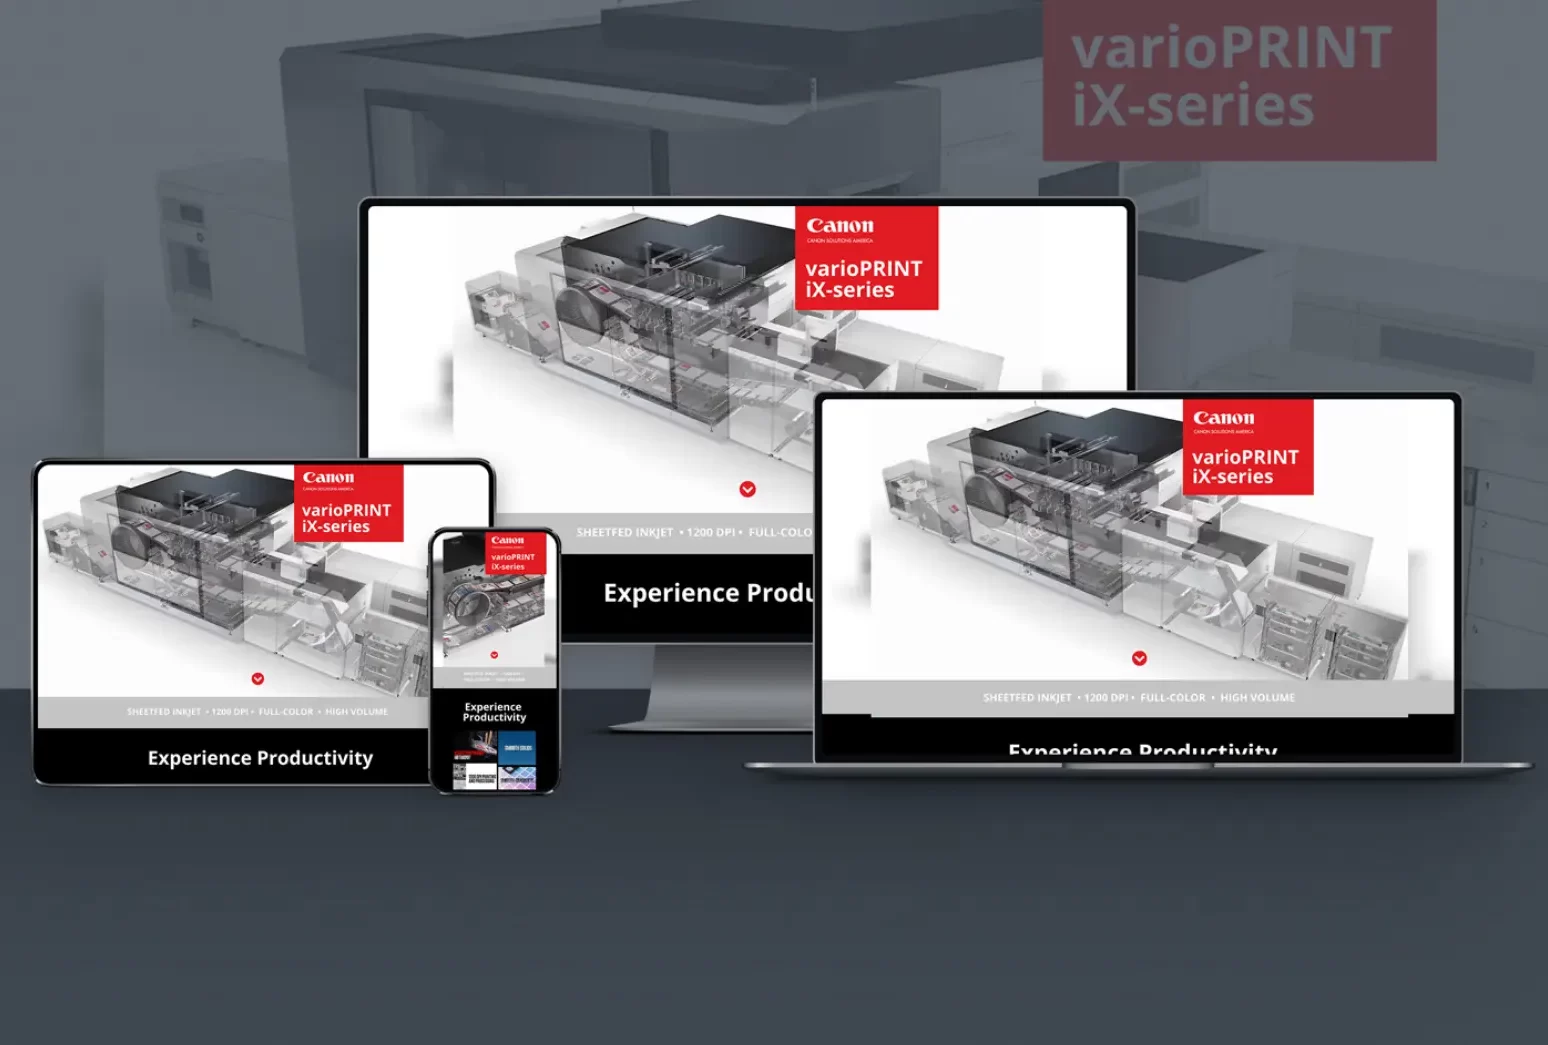 The Canon Solutions America varioPrint iX-series webpage on a variety of screens